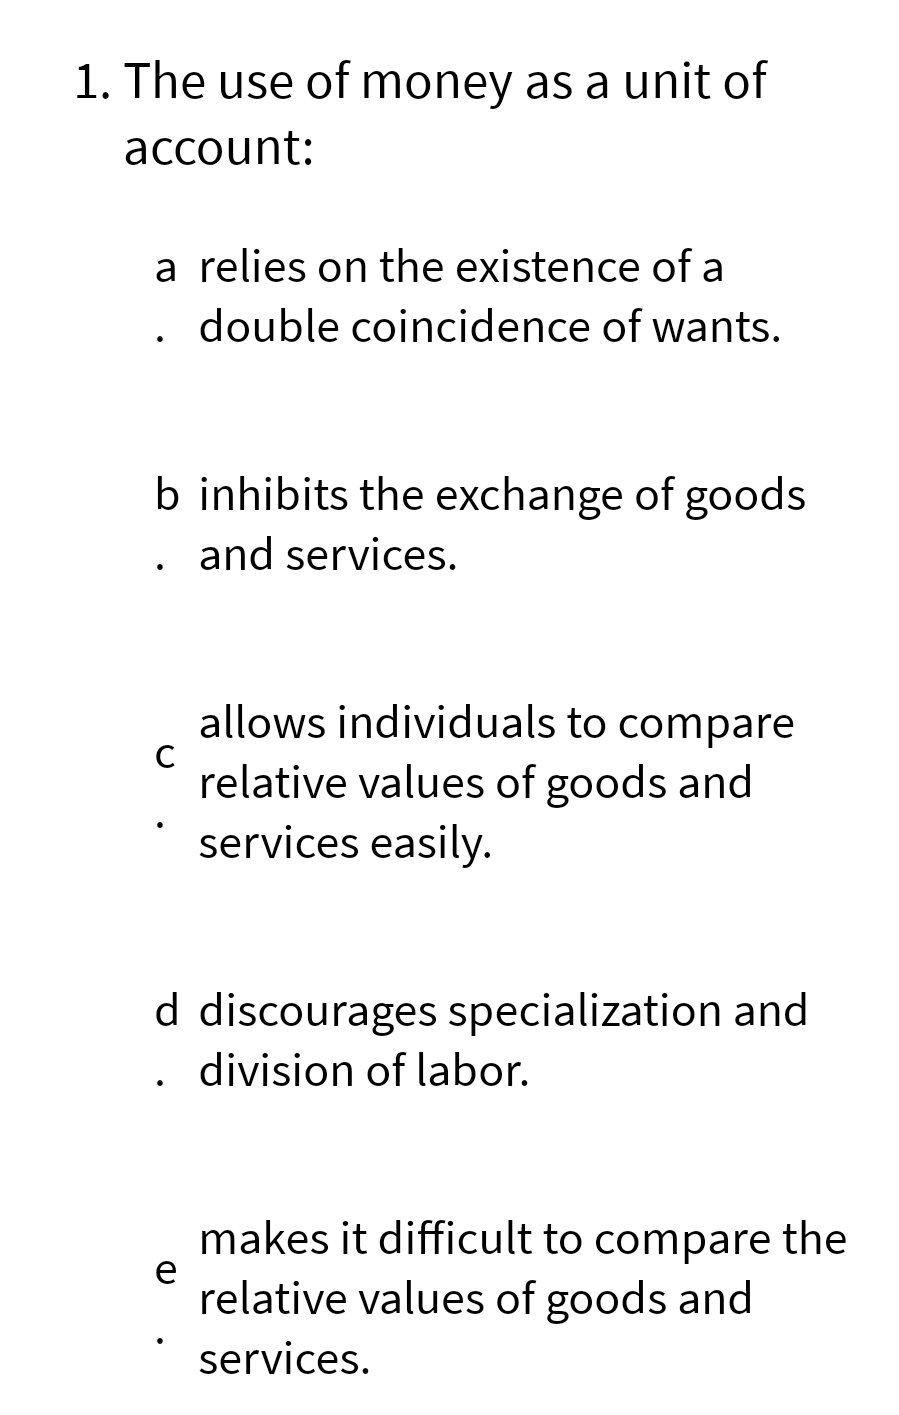 1. The use of money as a unit of
account:
a relies on the existence of a
double coincidence of wants.
b inhibits the exchange of goods
and services.
C
allows individuals to compare
relative values of goods and
services easily.
d discourages specialization and
division of labor.
e
makes it difficult to compare the
relative values of goods and
services.